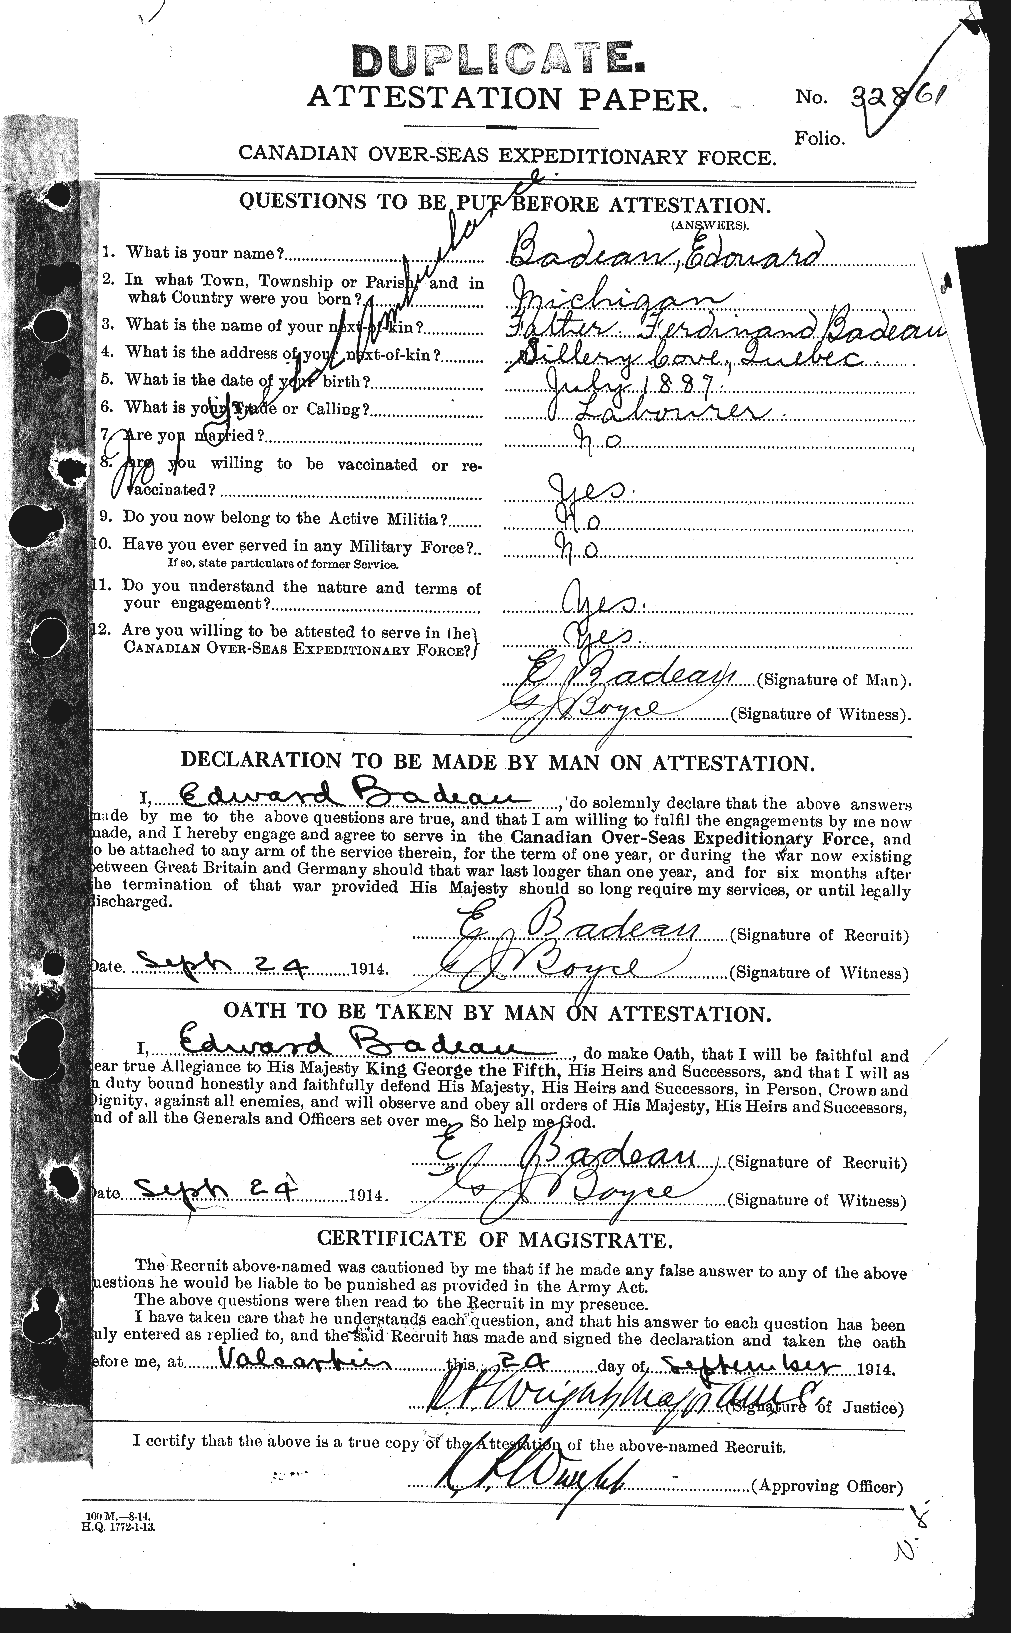 Personnel Records of the First World War - CEF 217795a